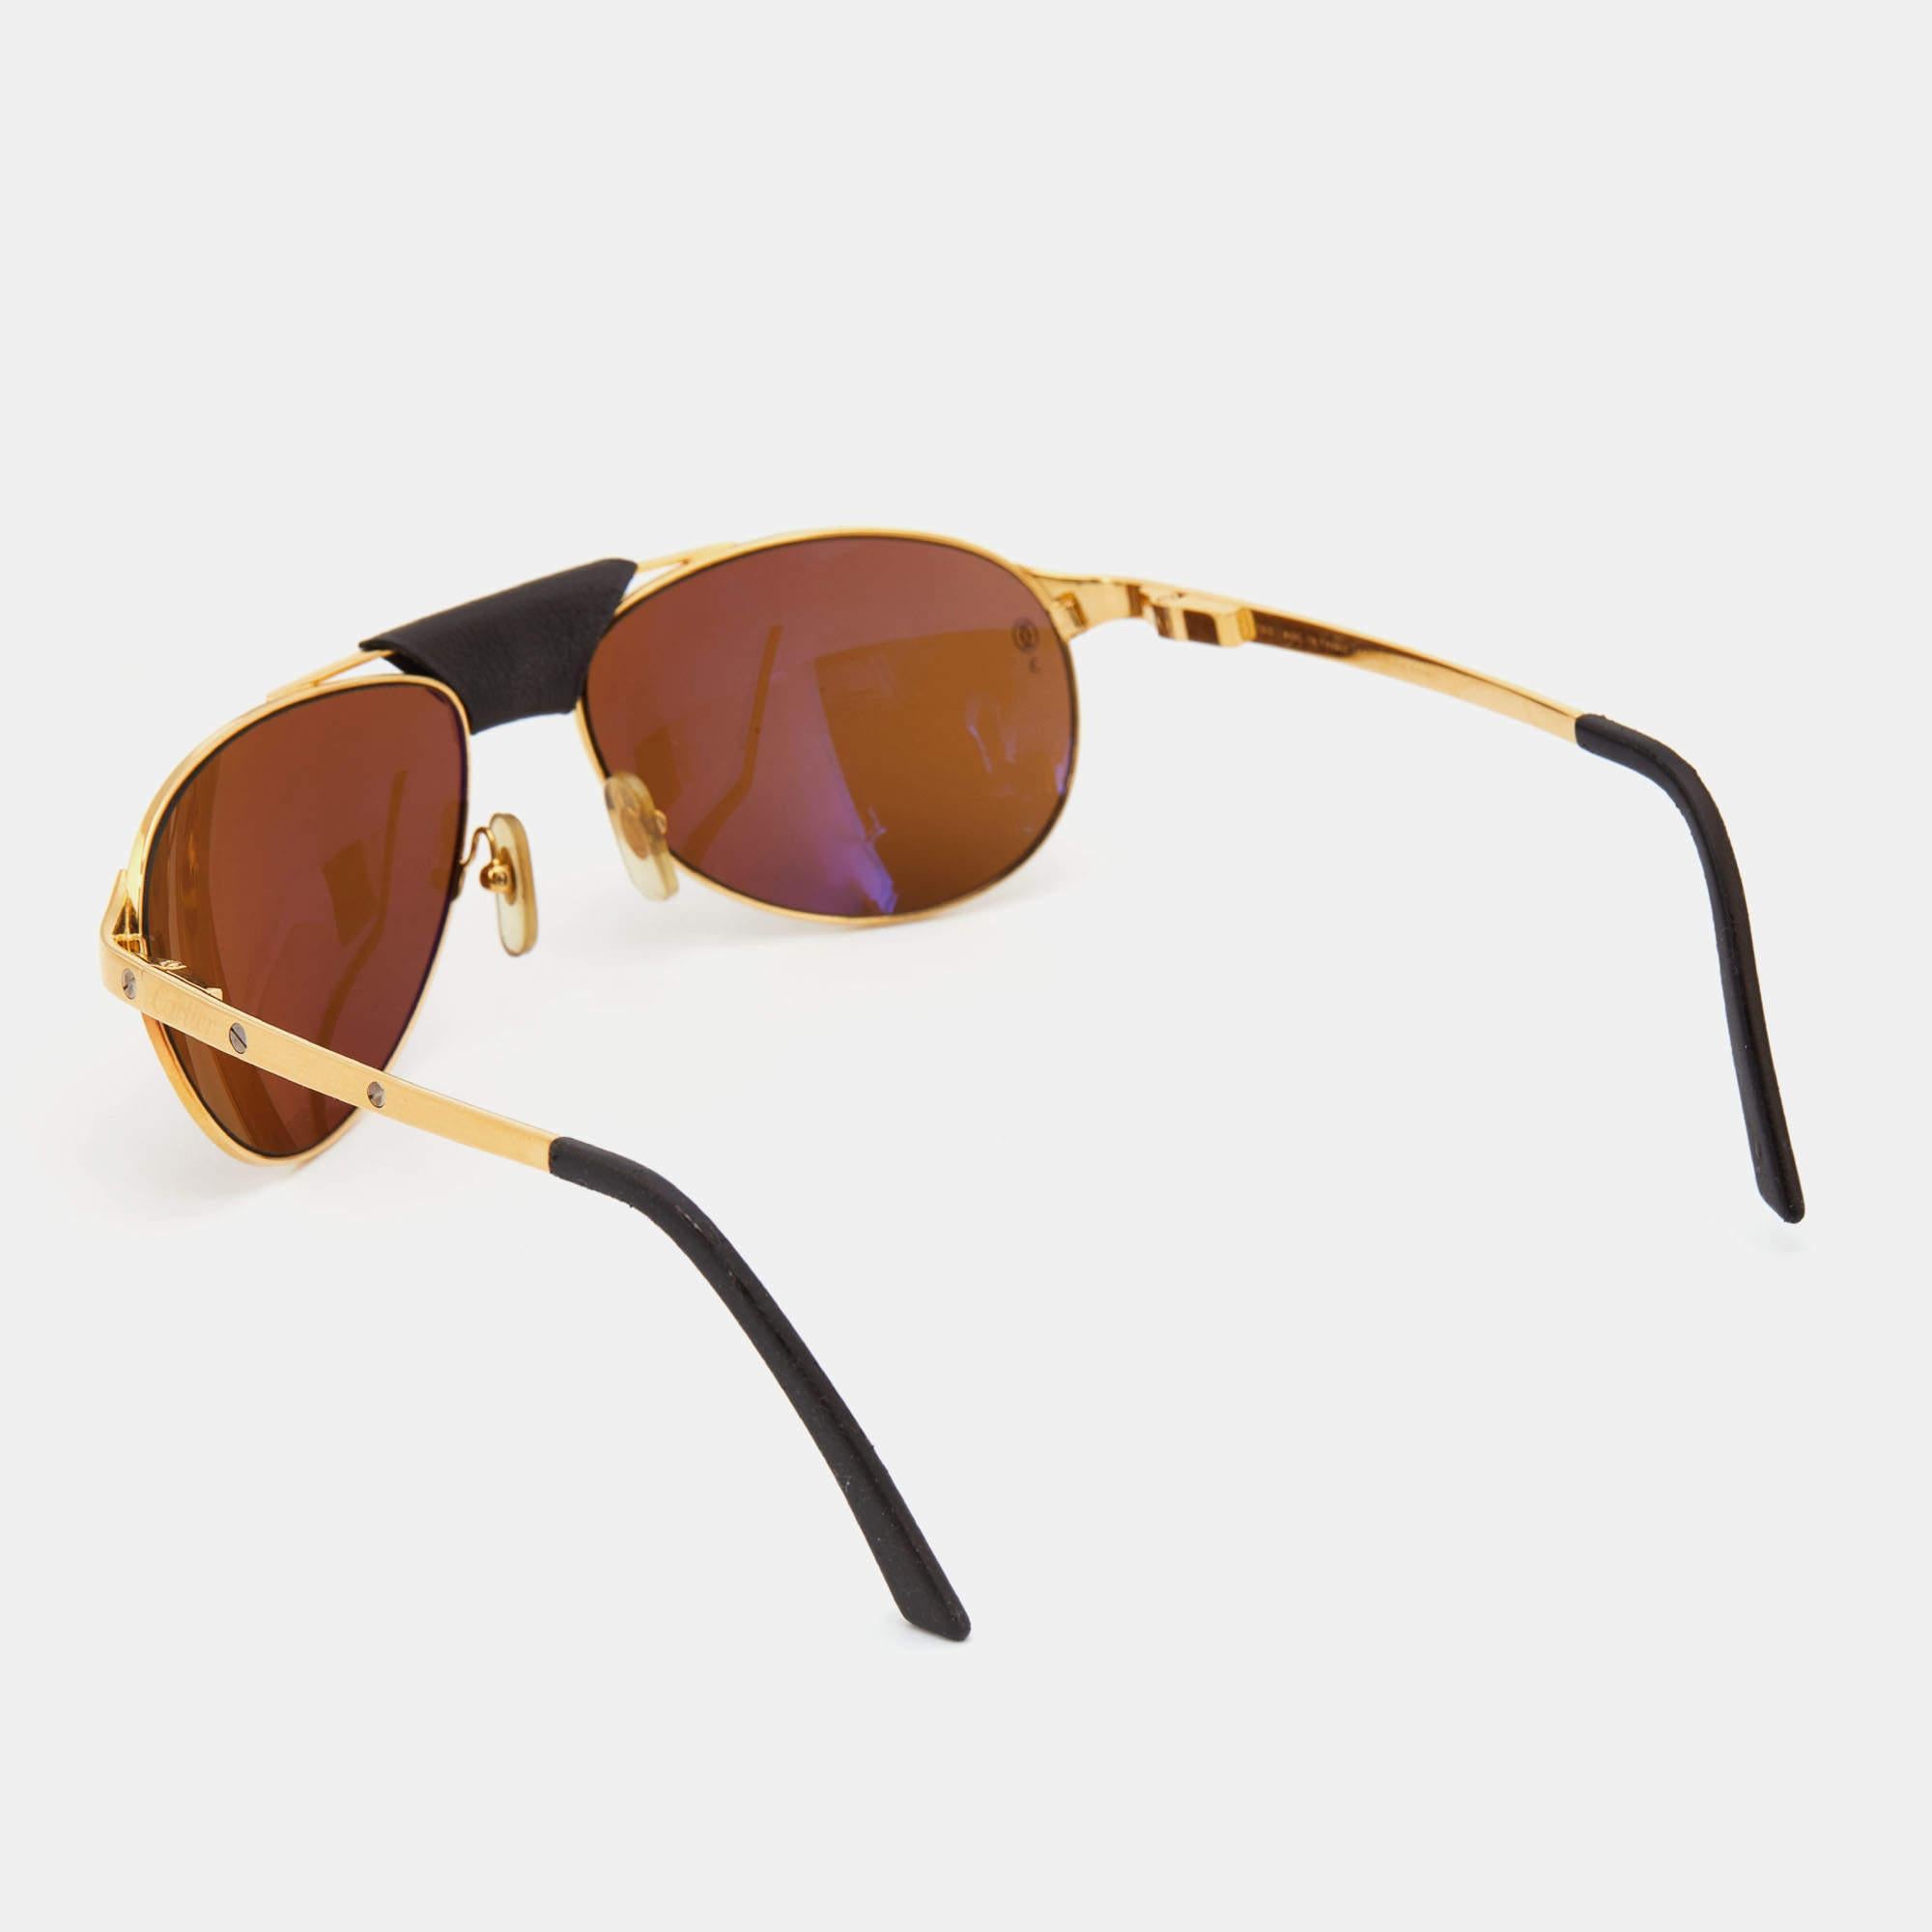 Embrace sunny days in full style with the help of this pair of Cartier sunglasses. Created with expertise, the luxe sunglasses feature a well-designed frame and high-grade lenses that are equipped to protect your eyes.

Includes: Original Box,